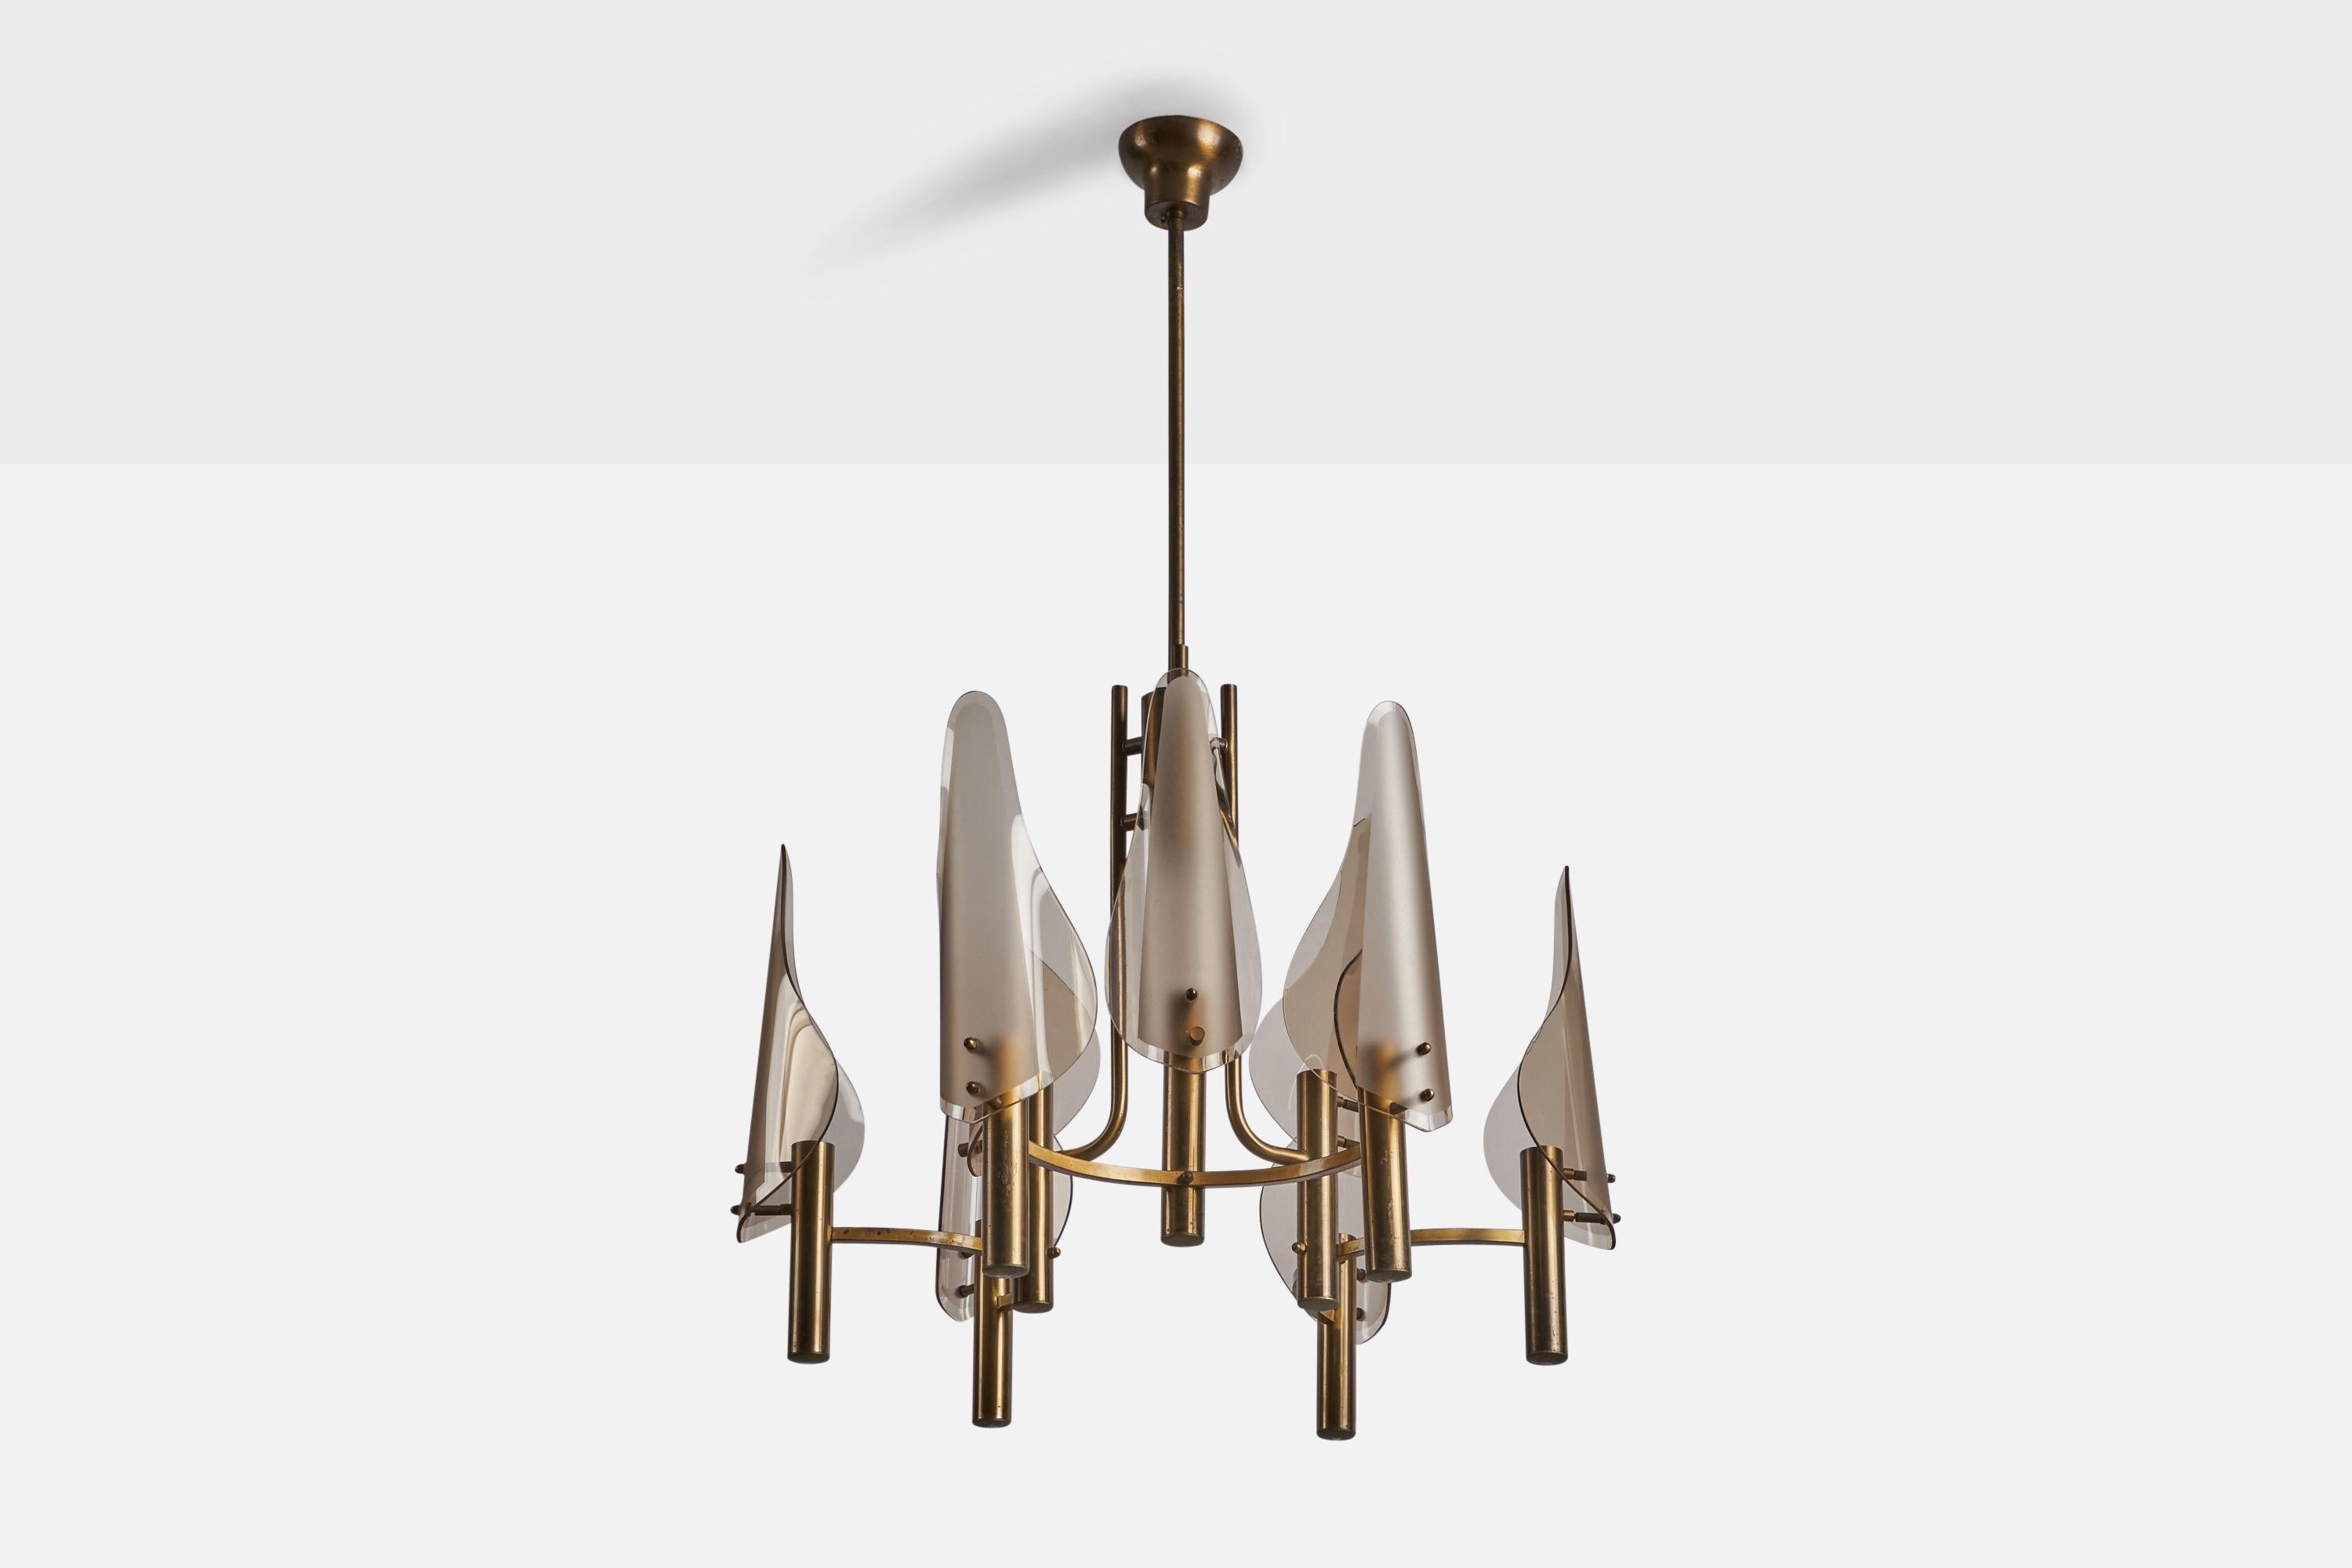 A nine-armed brass and smoked glass chandelier designed and produced in Italy, 1960s.

Overall Dimensions (inches): 39” H x 24” Diameter
Bulb Specifications: E-14 Bulb
Number of Sockets: 9